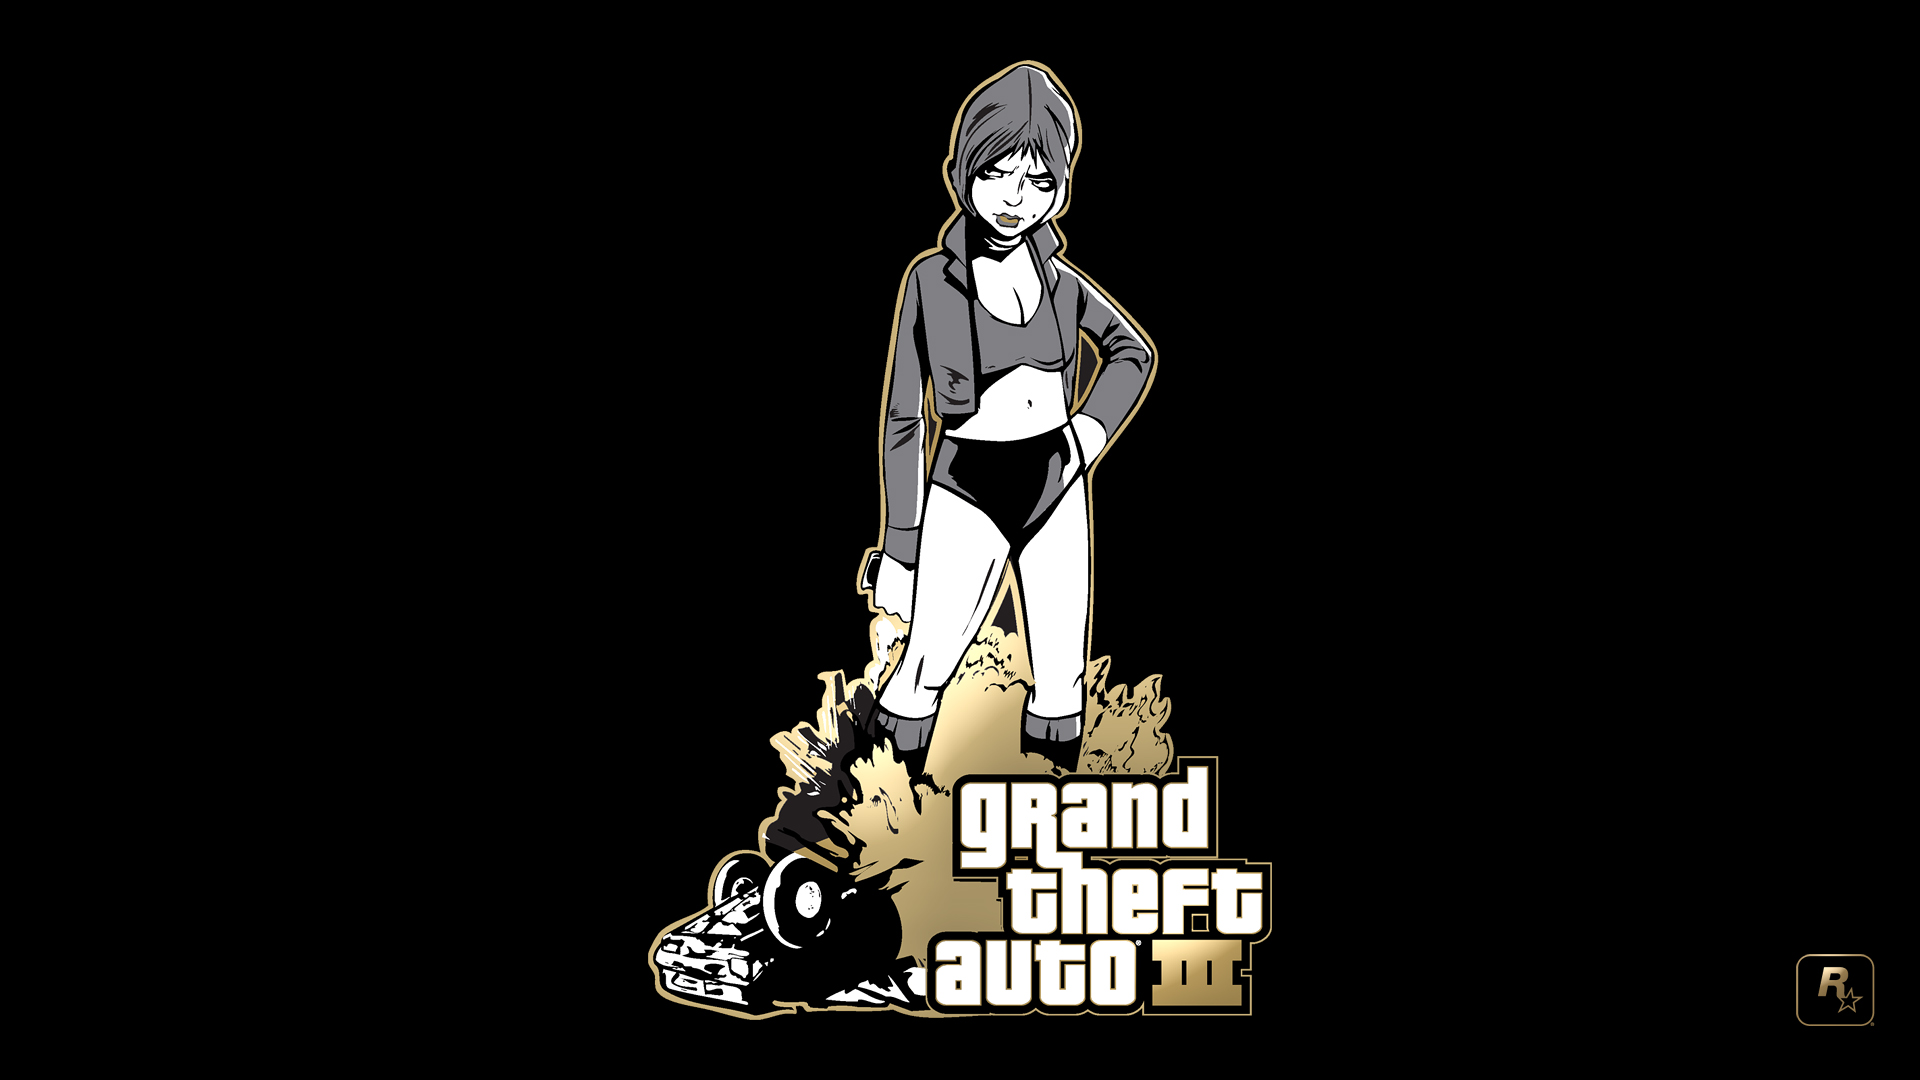 Video Game Grand Theft Auto III HD Wallpaper | Background Image